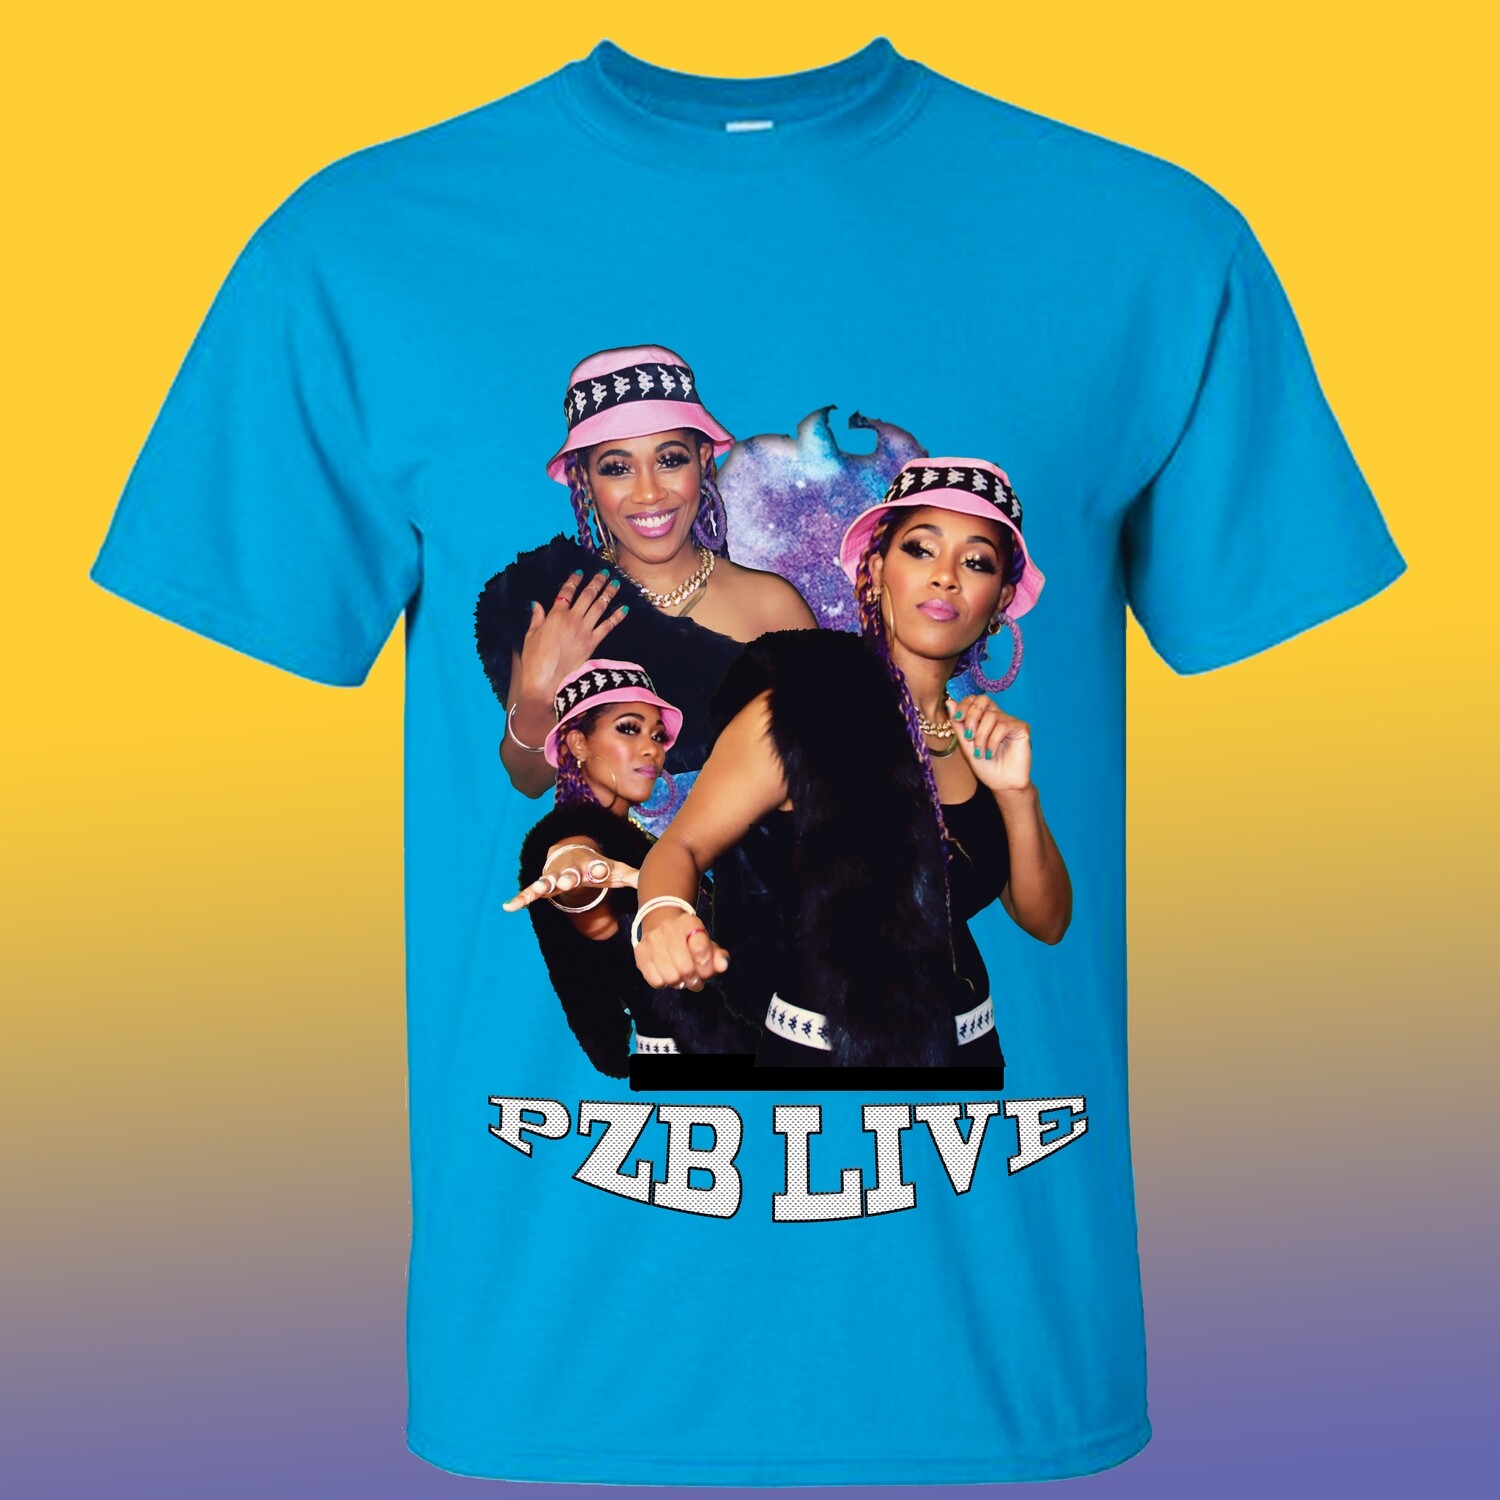 PZB Live Tour Tee